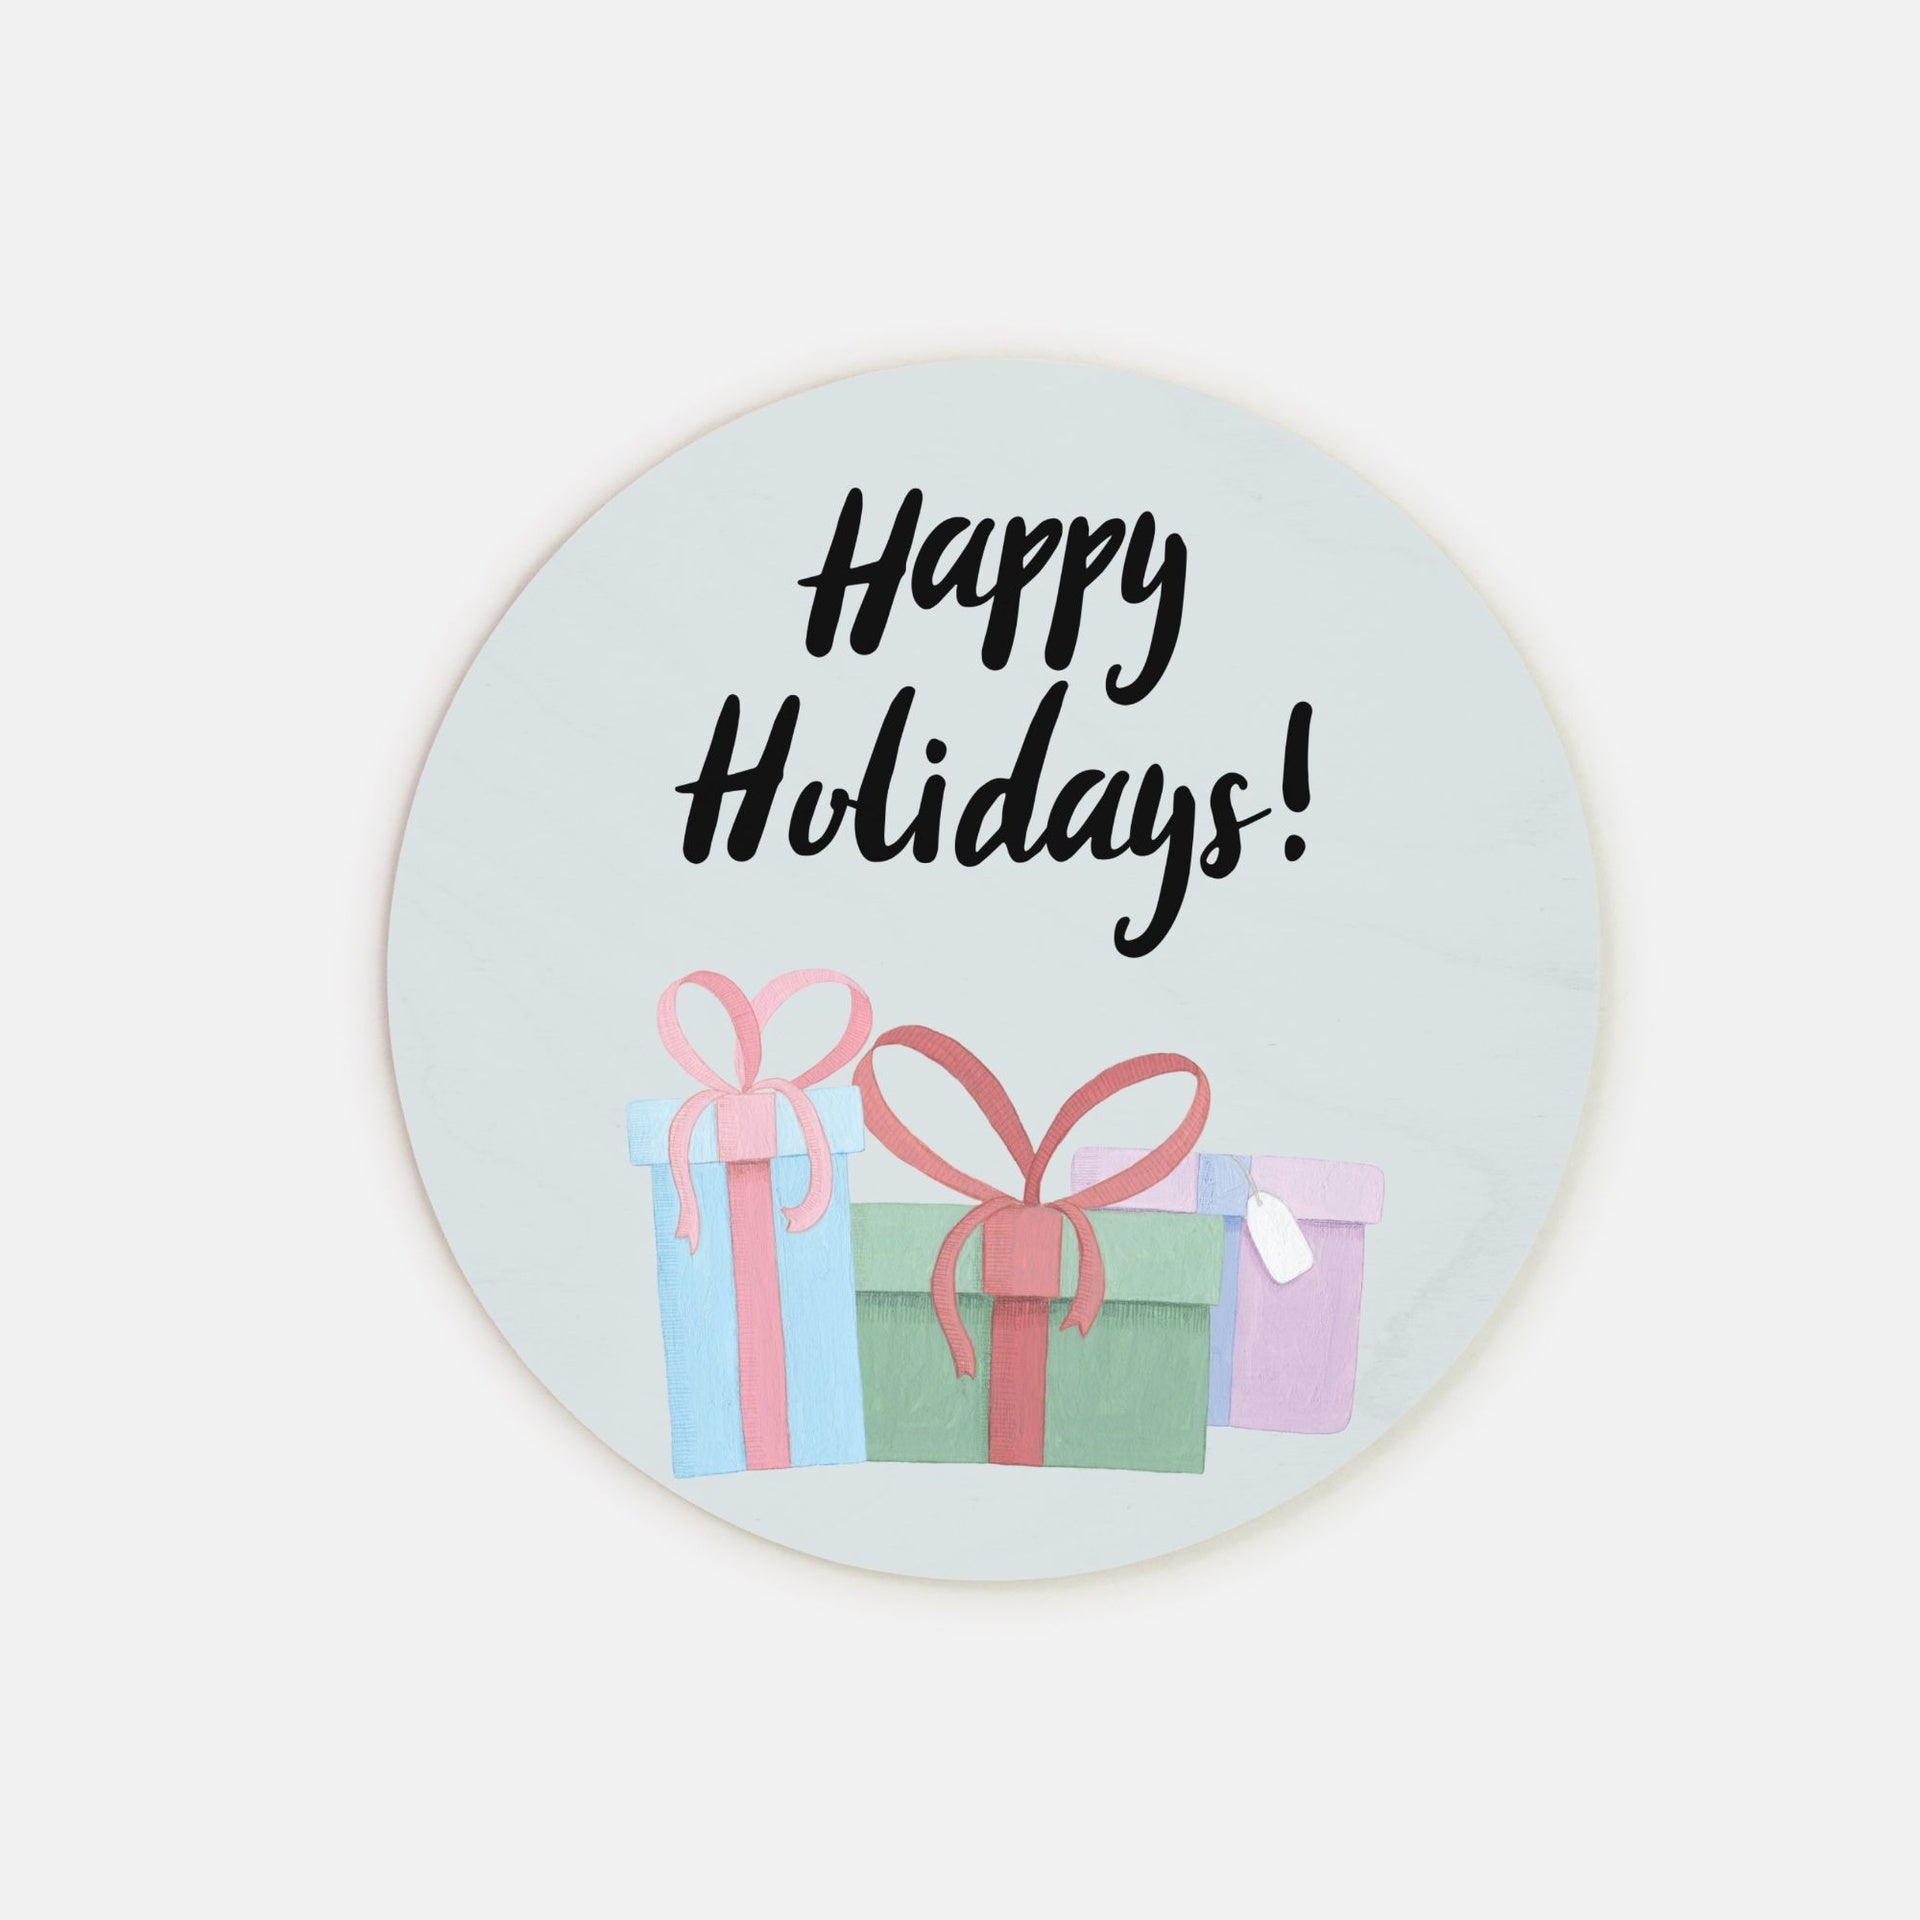 8" Round Wood Sign - Happy Holidays & Presents